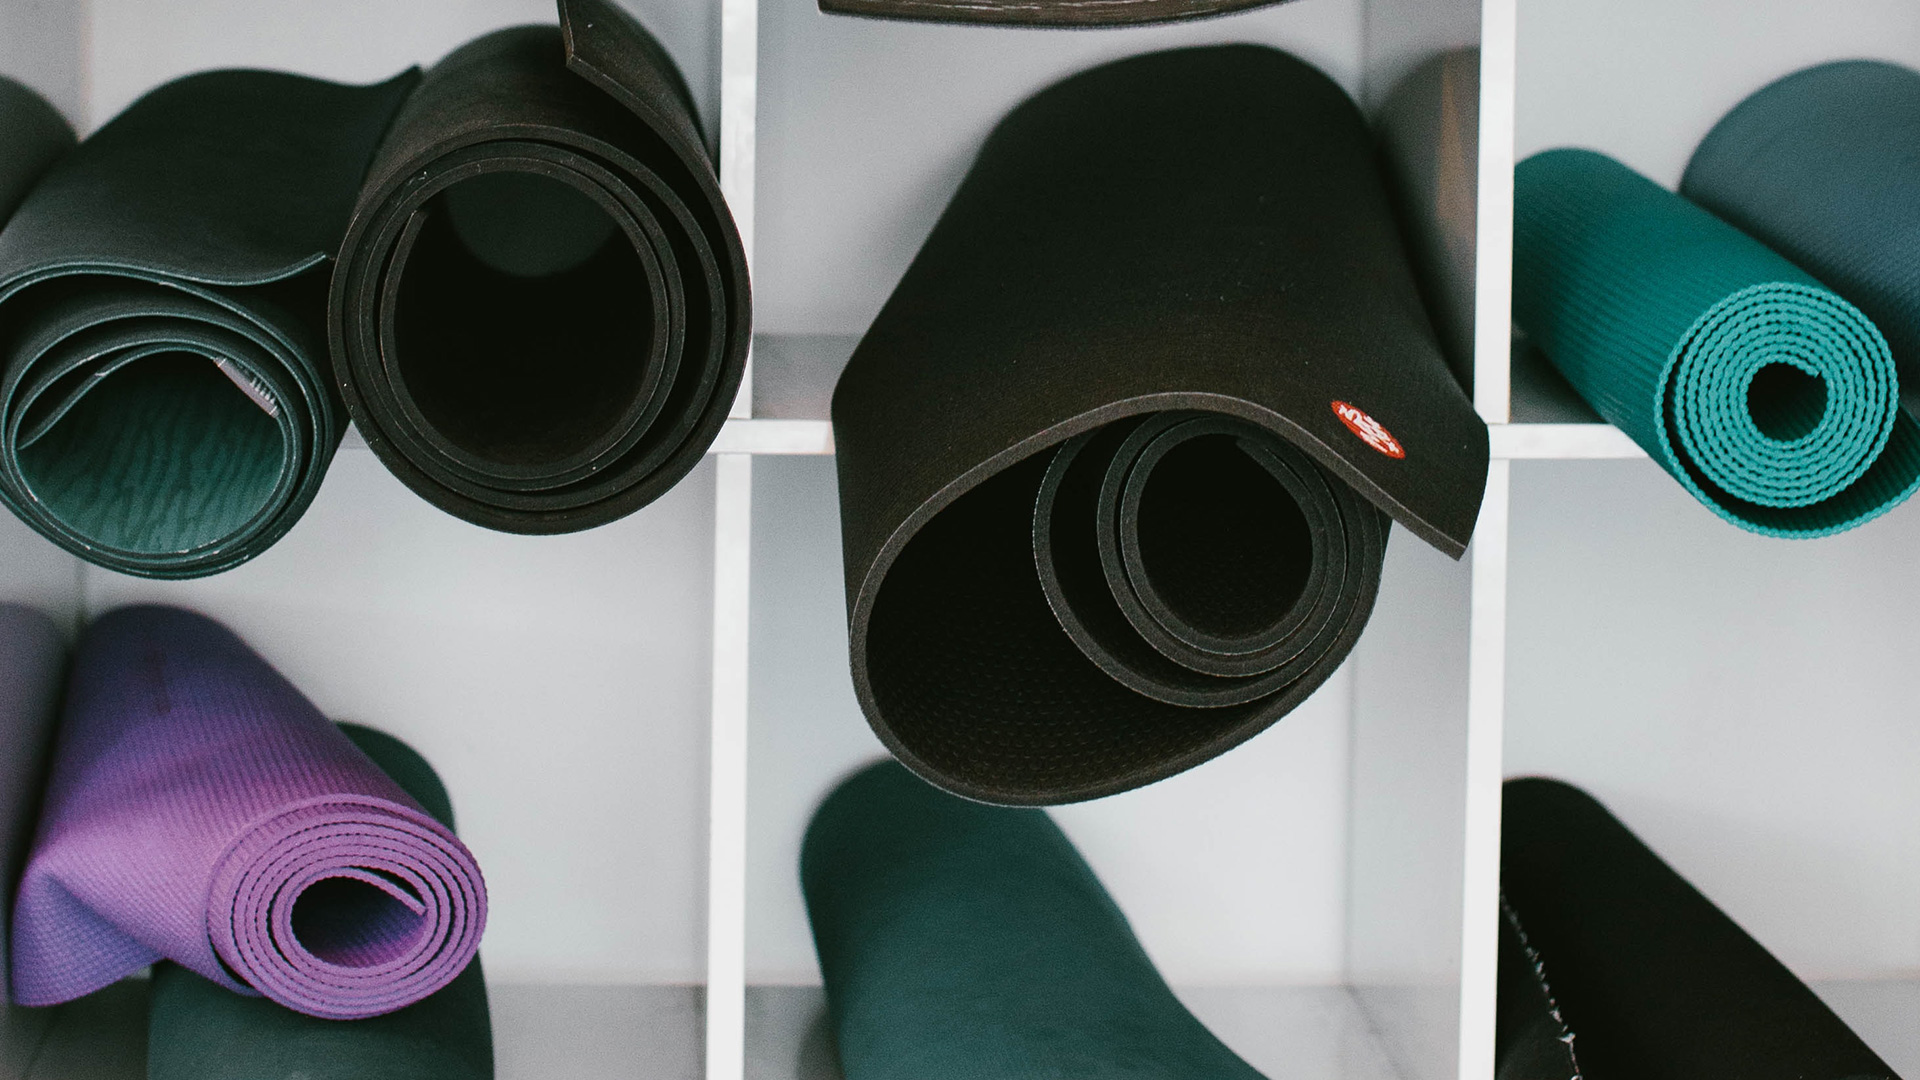 How to clean a yoga mat: tips for foam, rubber and cork mats